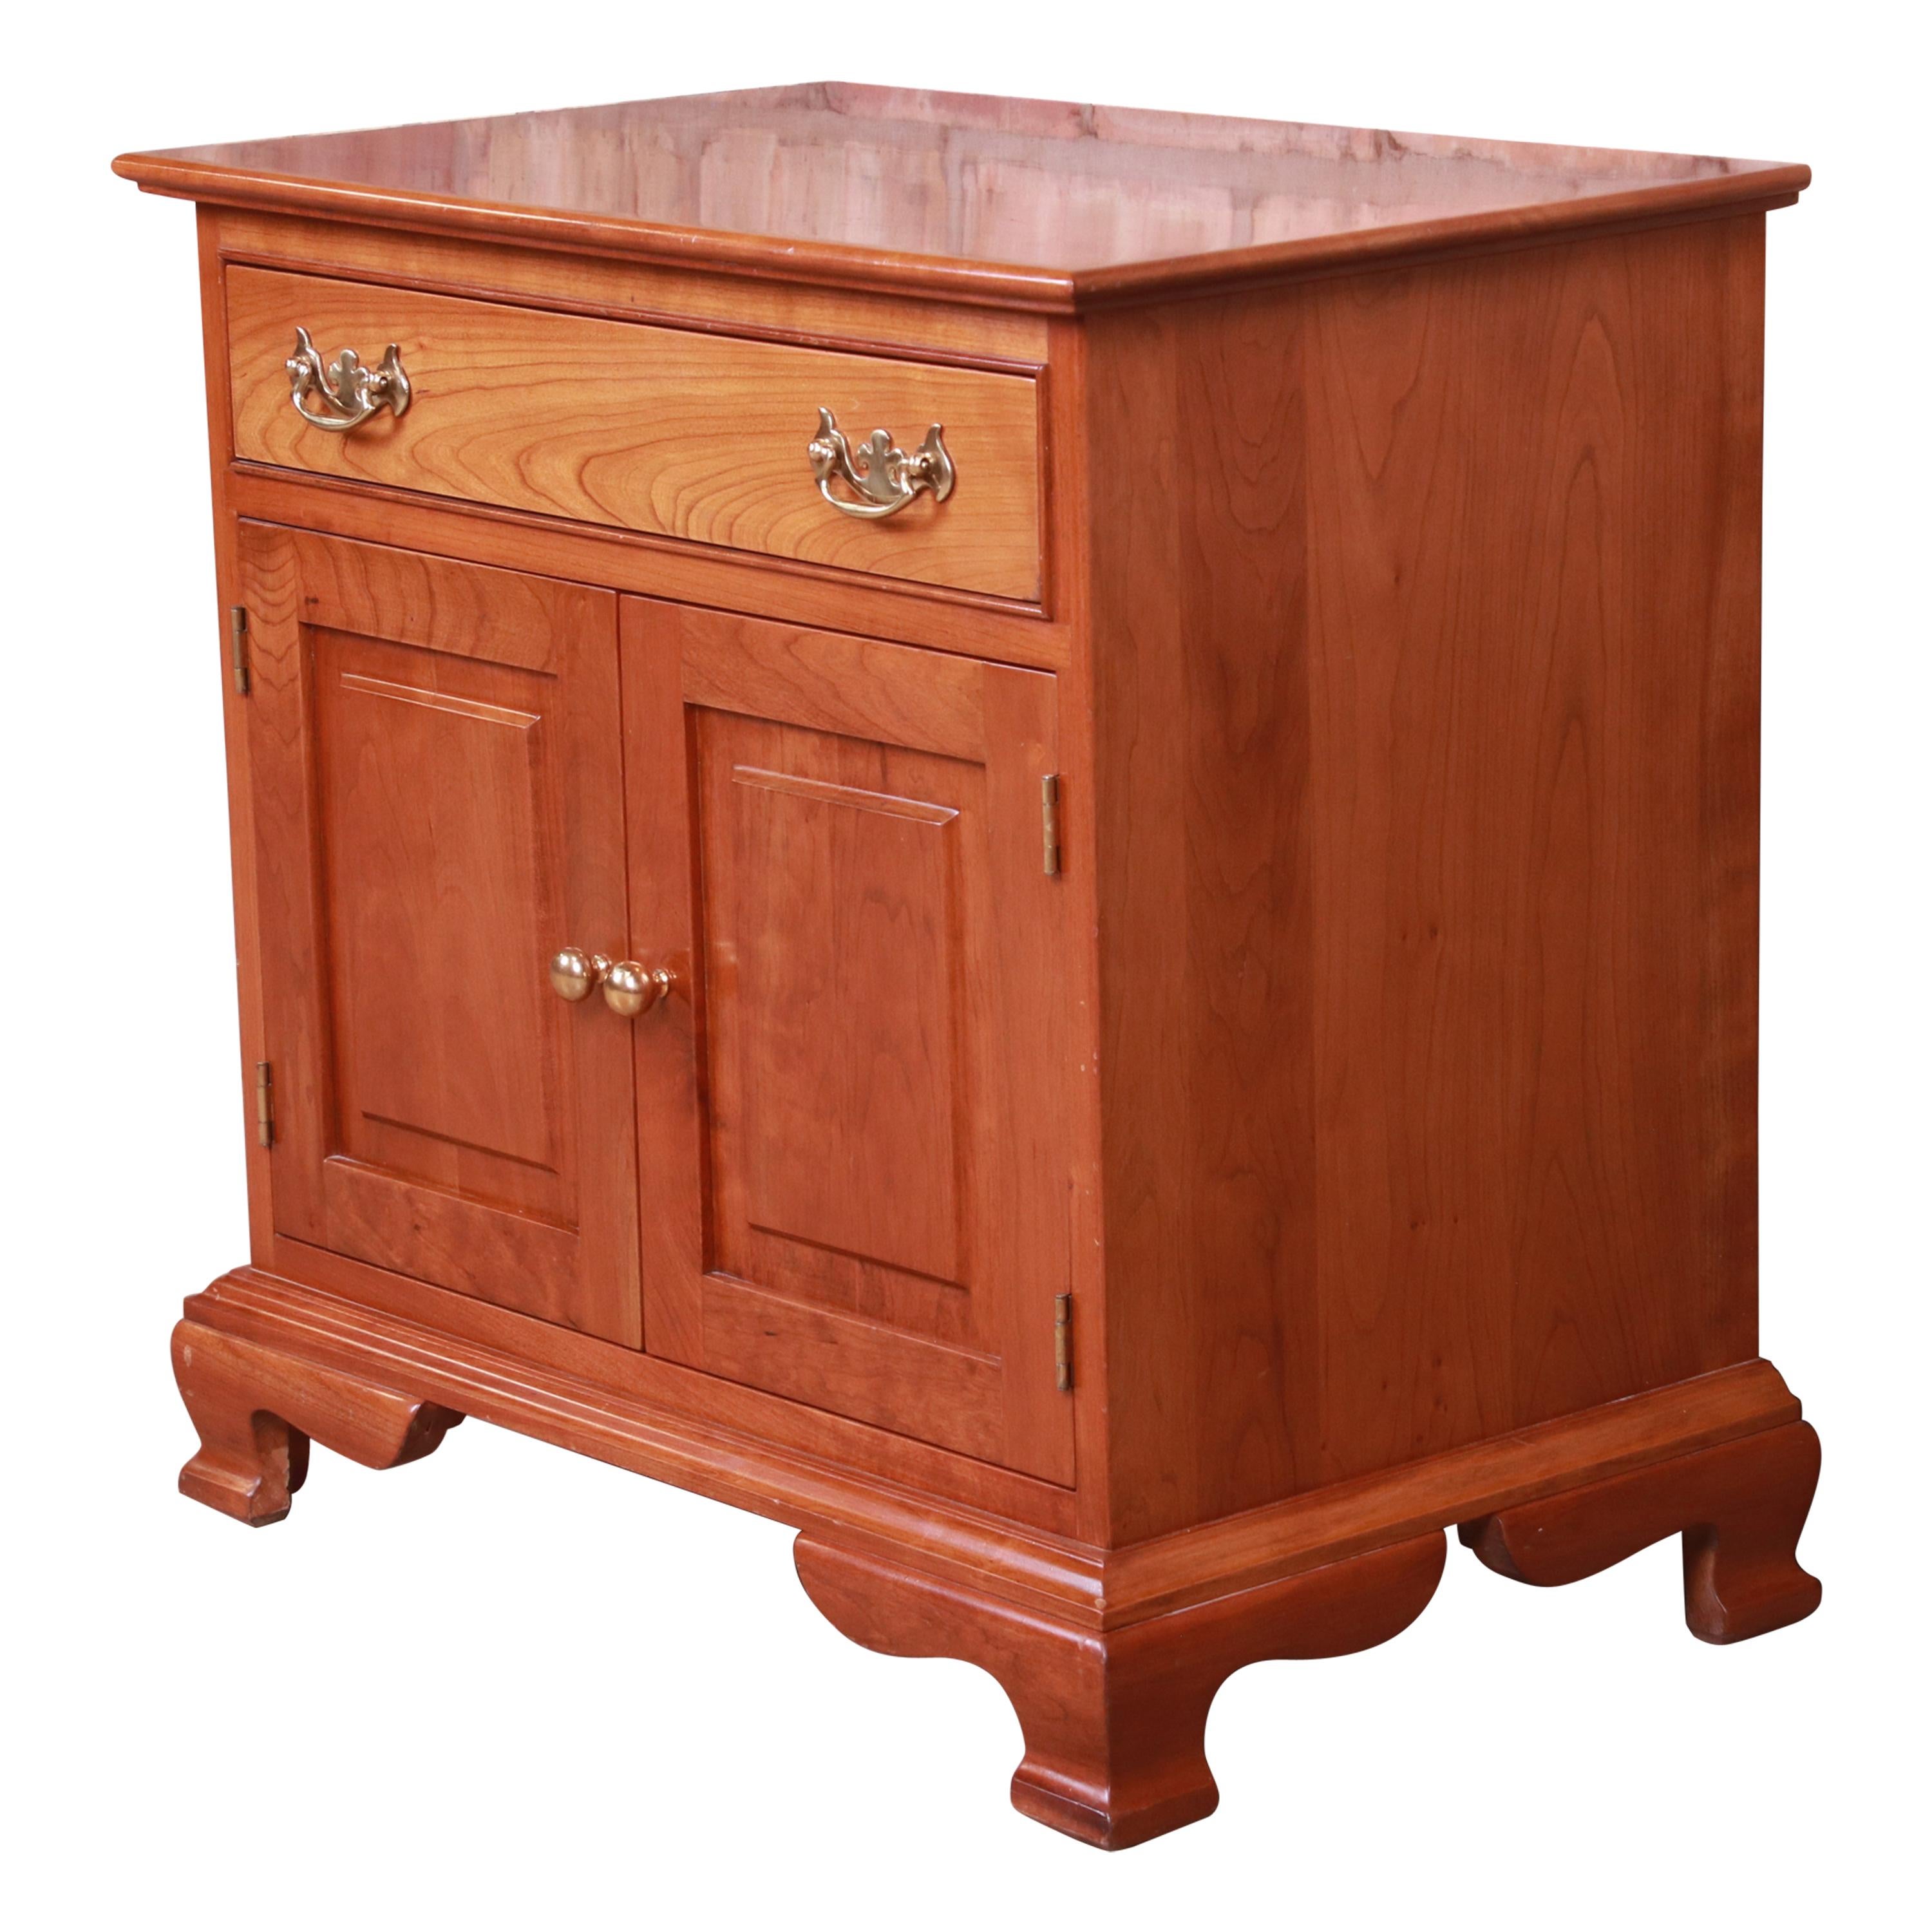 Stickley American Colonial Solid Cherry Wood Nightstand, Circa 1950s